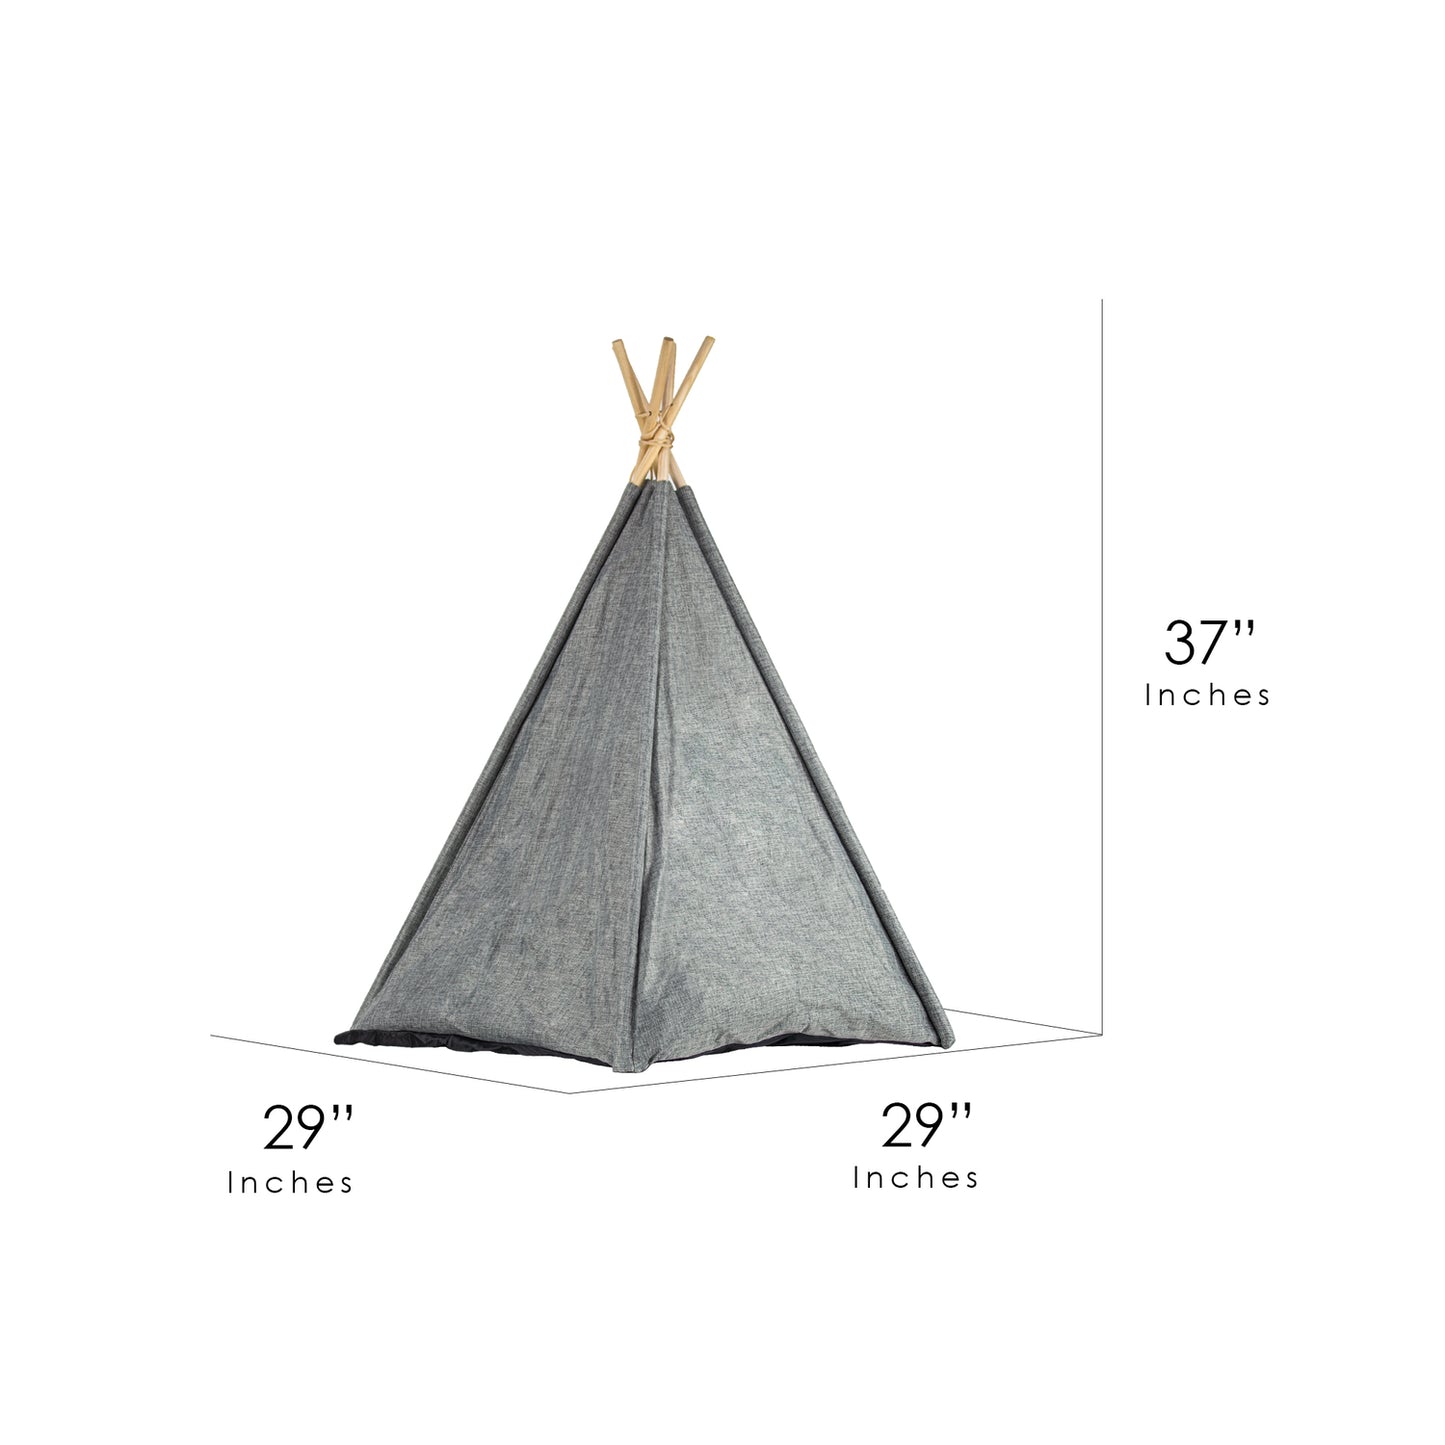 American Art Decor Pet Teepee Portable Dog & Cat Bed with Cushion - Grey